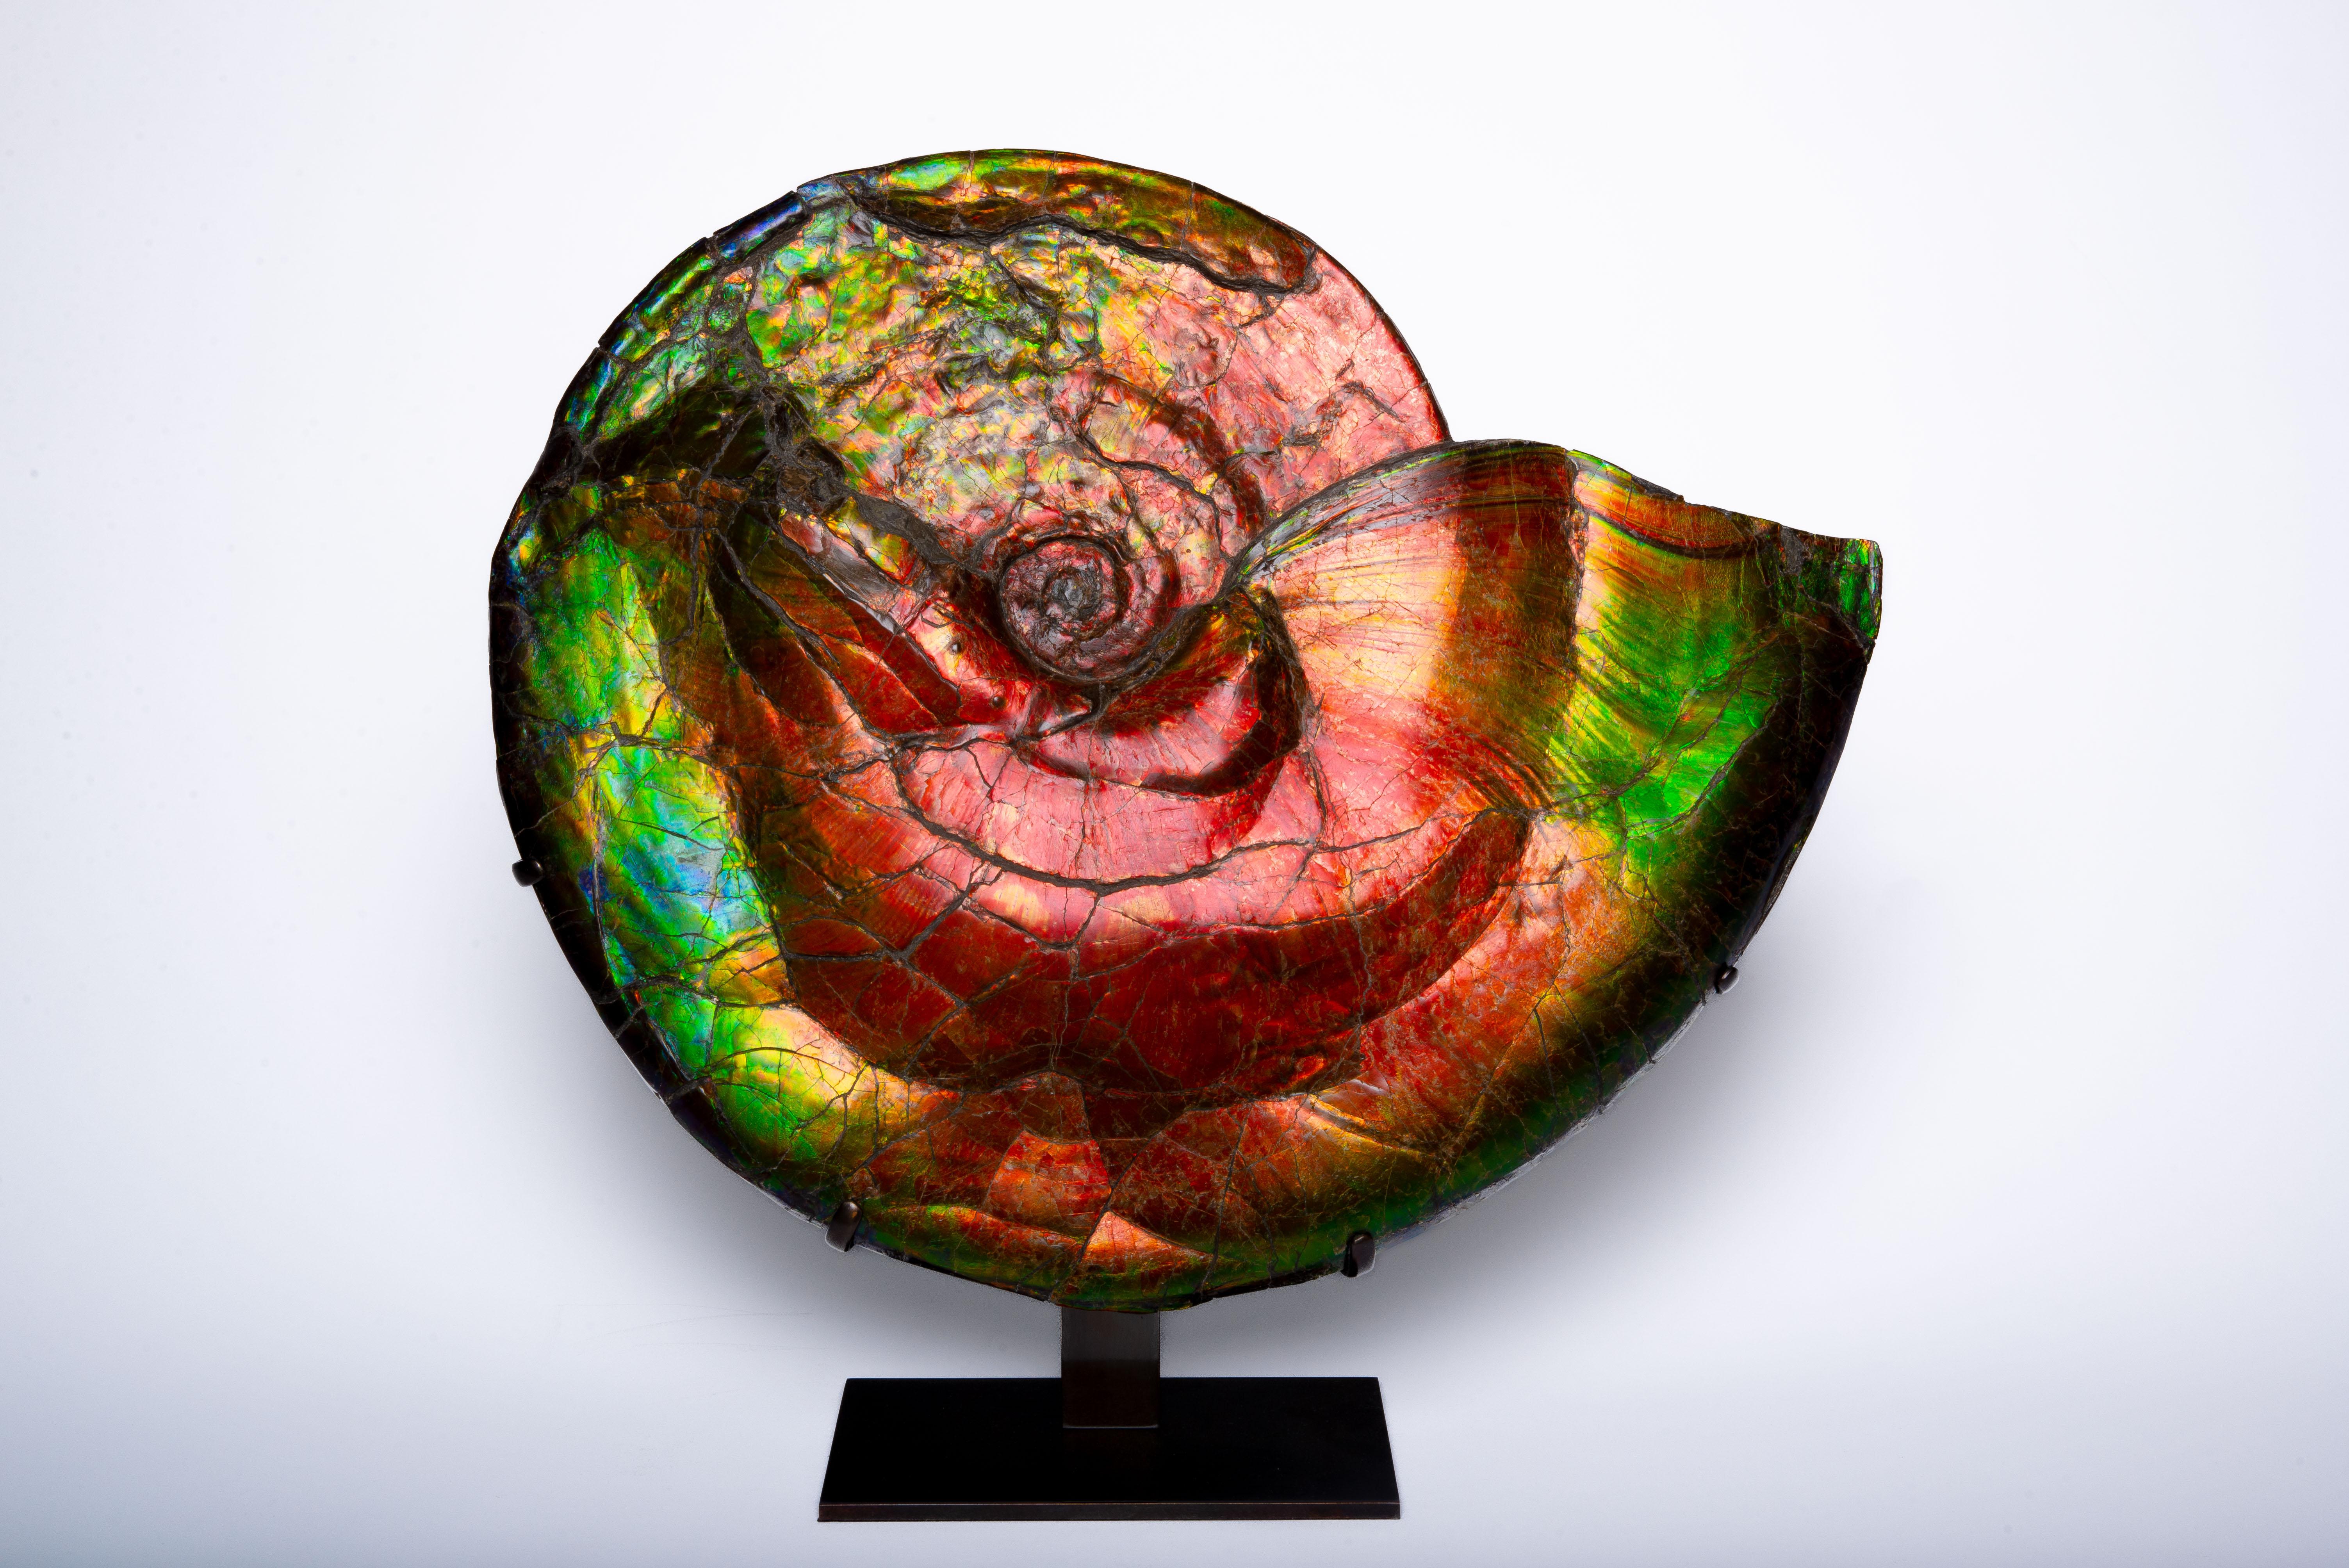 A magnificent example of one of the most spectacular fossils. A large and intensely vibrant ammonite, Placenticeras costatum, from the Bearpaw formation, Alberta, Canada, dating to the late Cretaceous period, around 75 million years before present.